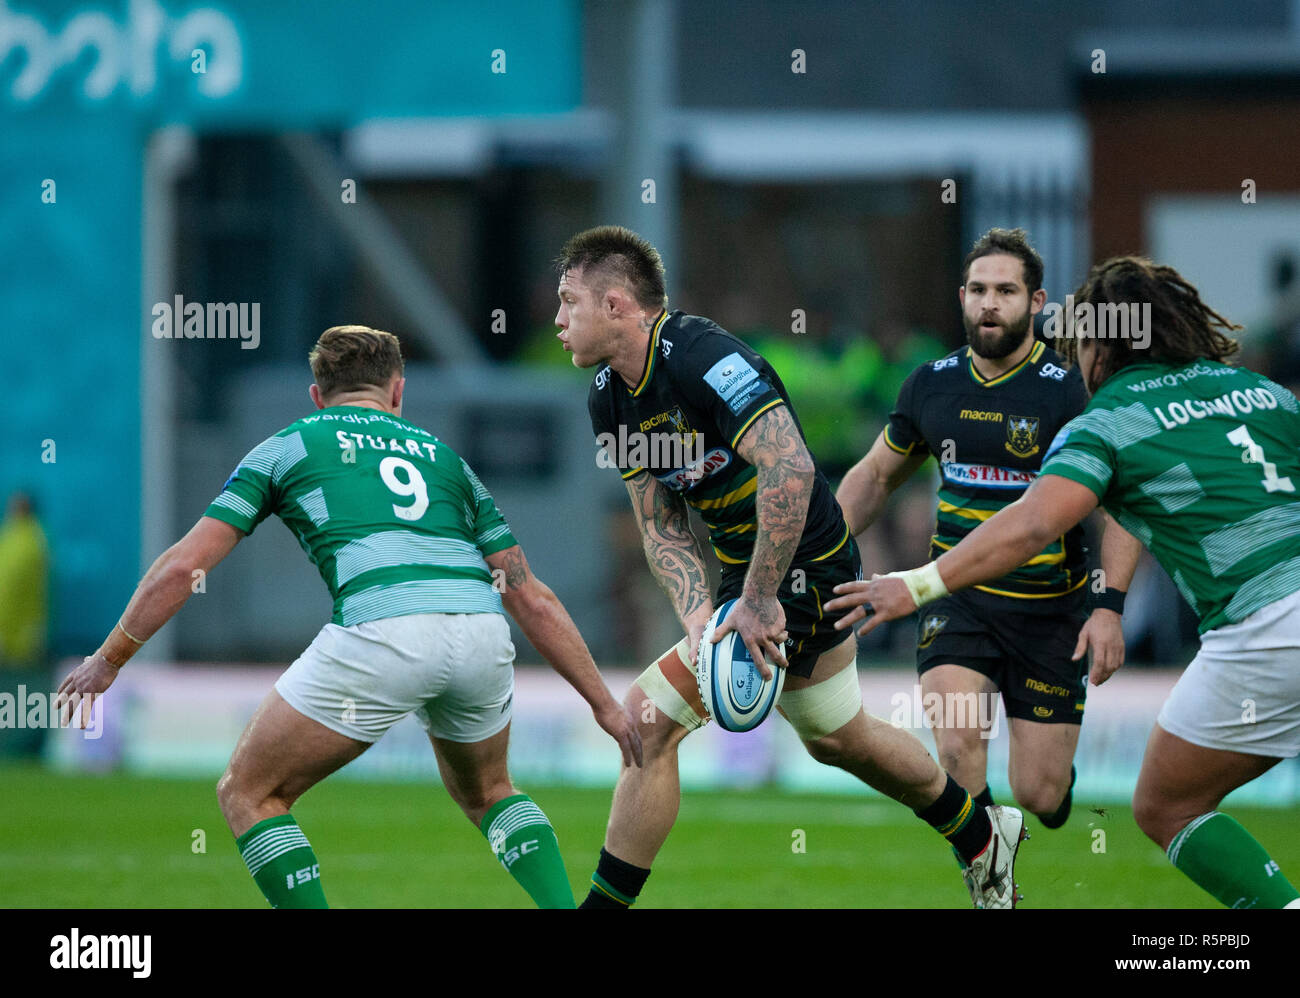 Northampton, UK. 1st December 2018. Teimana Harrison of Northampton Saints runs with the ball during the Gallagher Premiership Rugby match between Northampton Saints and Newcastle Falcons. Andrew Taylor/Alamy Live News Stock Photo